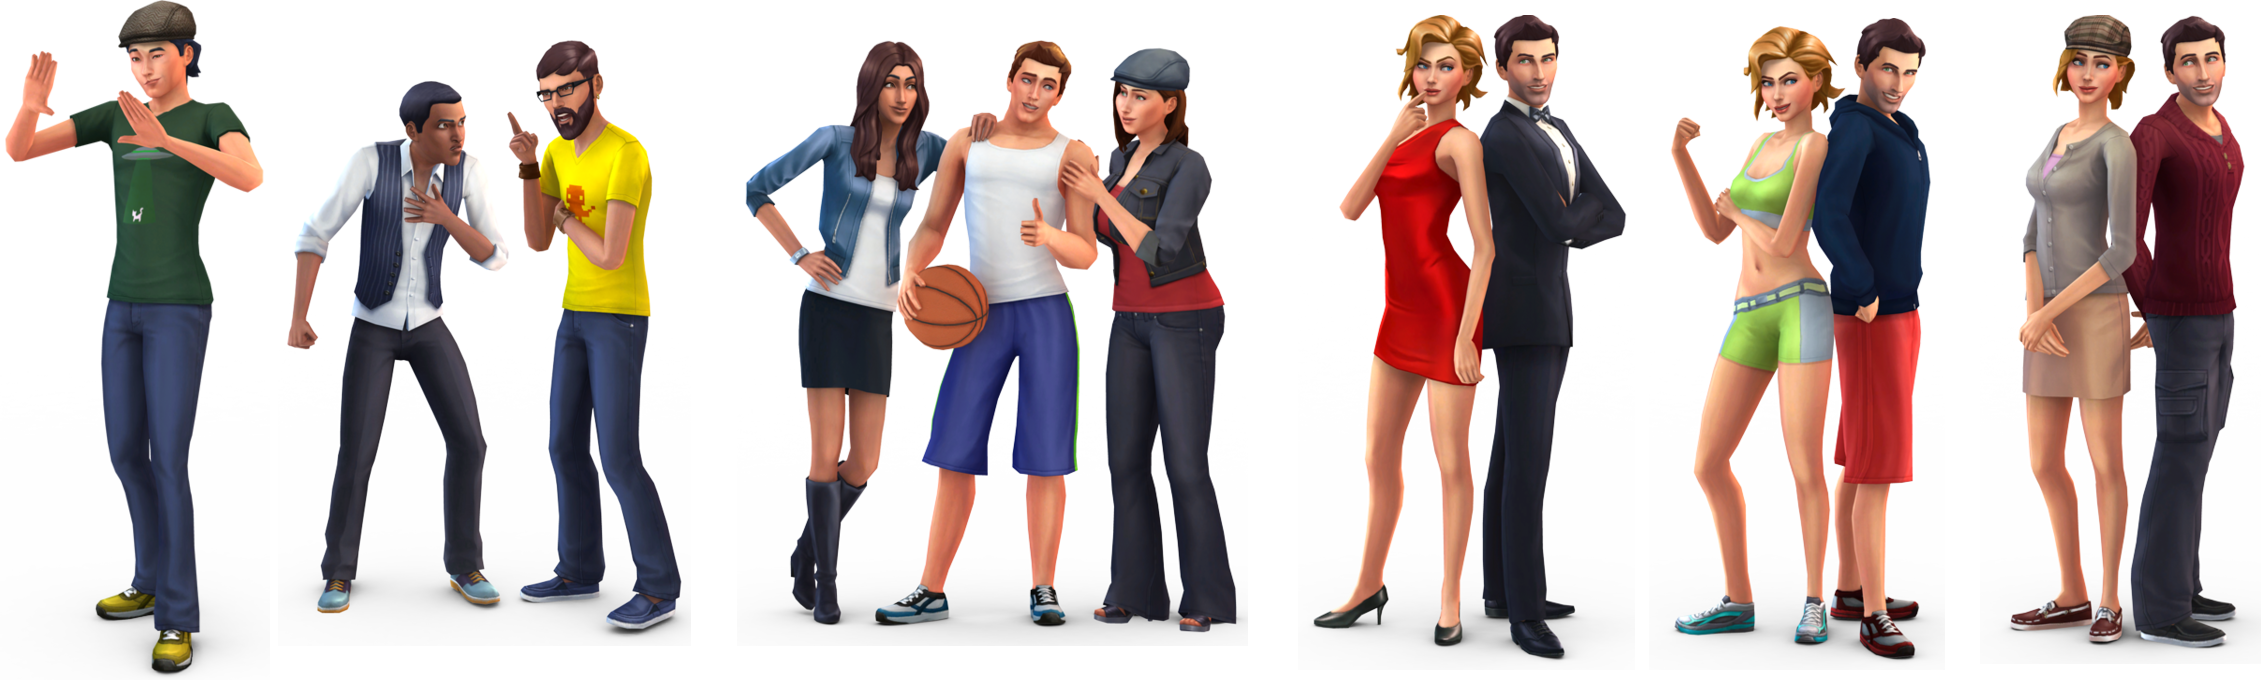 the-sims-4-renders